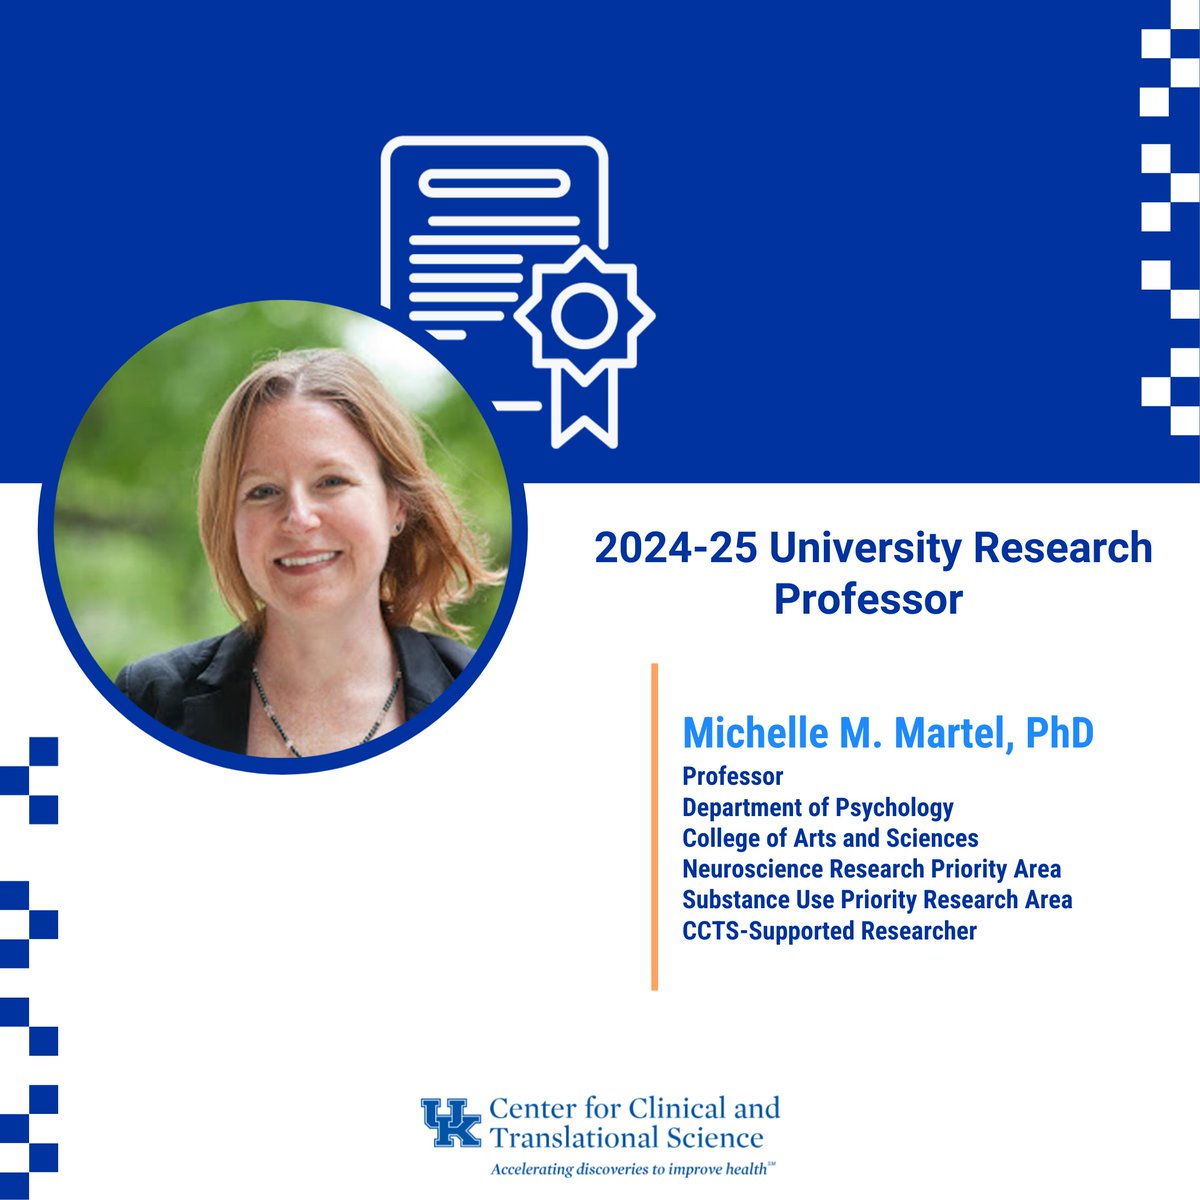 Congratulations, CCTS-Supported Researcher, Dr. Michelle M. Martel for being named a 2024-25 University Research Professor! Read the full announcement here: uknow.uky.edu/research/16-fa…